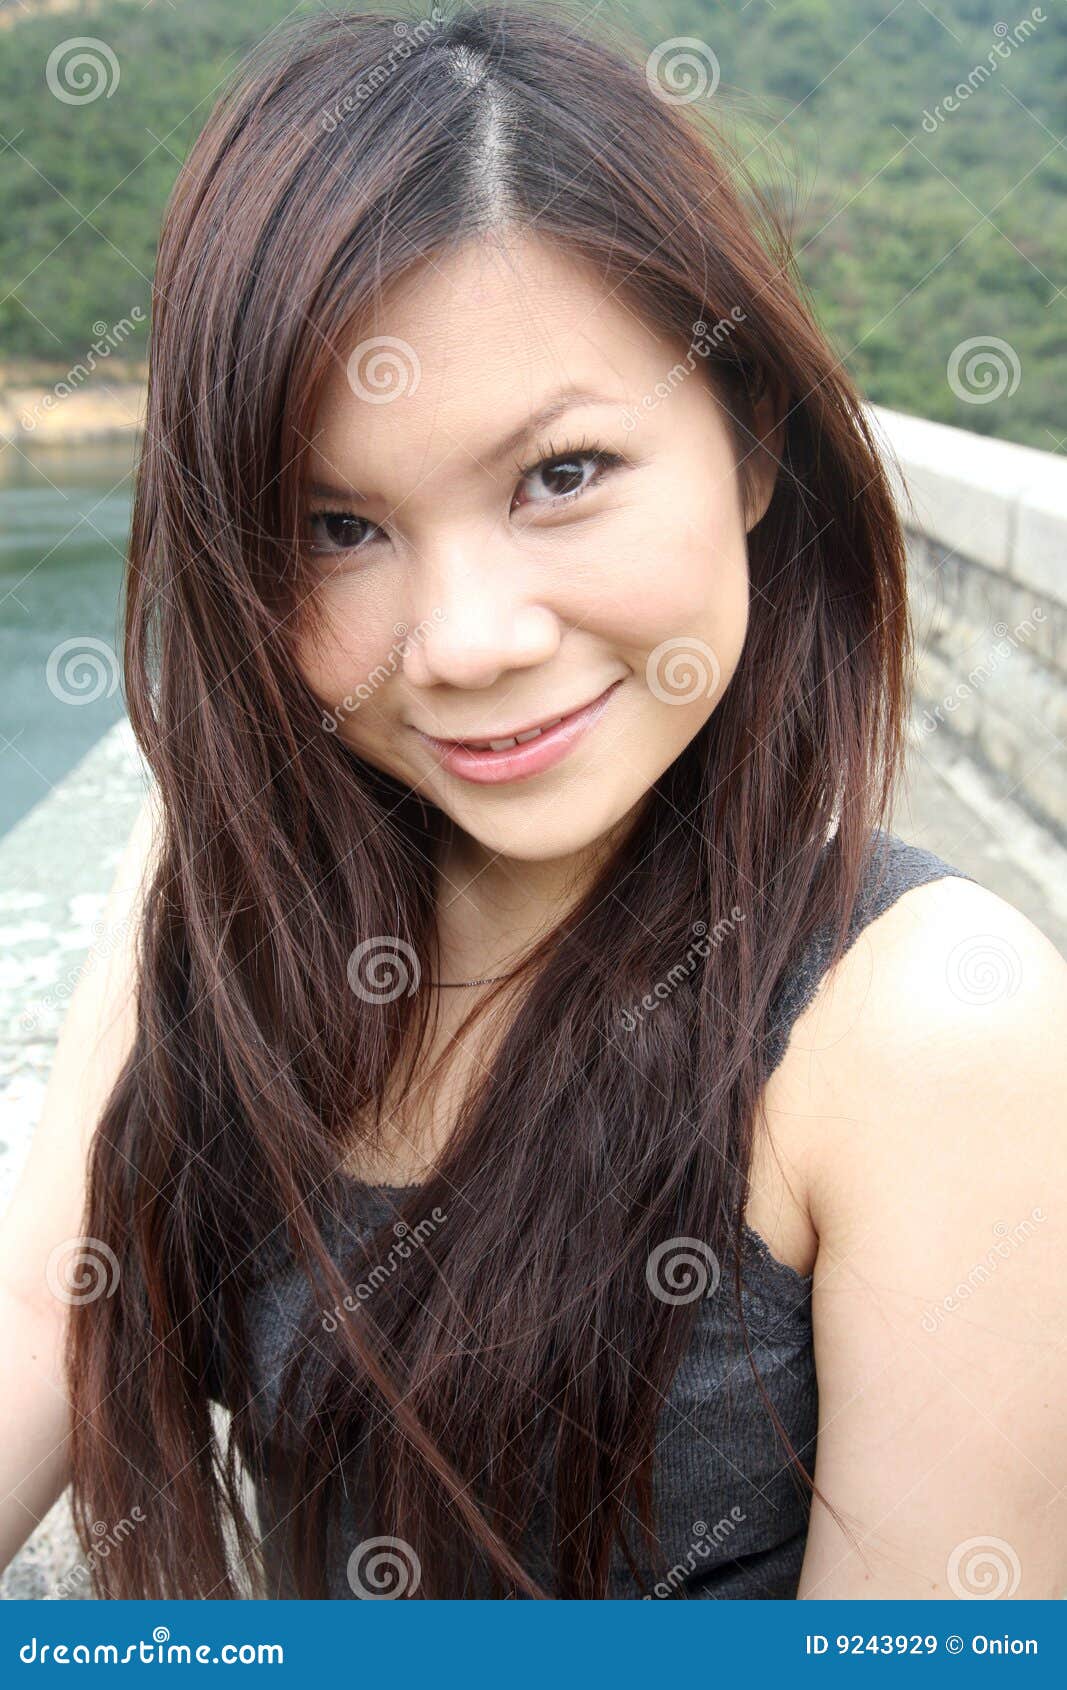 Cute Asian Girl Looking at Viewer Stock Image - Image of girl, pretty:  9243929